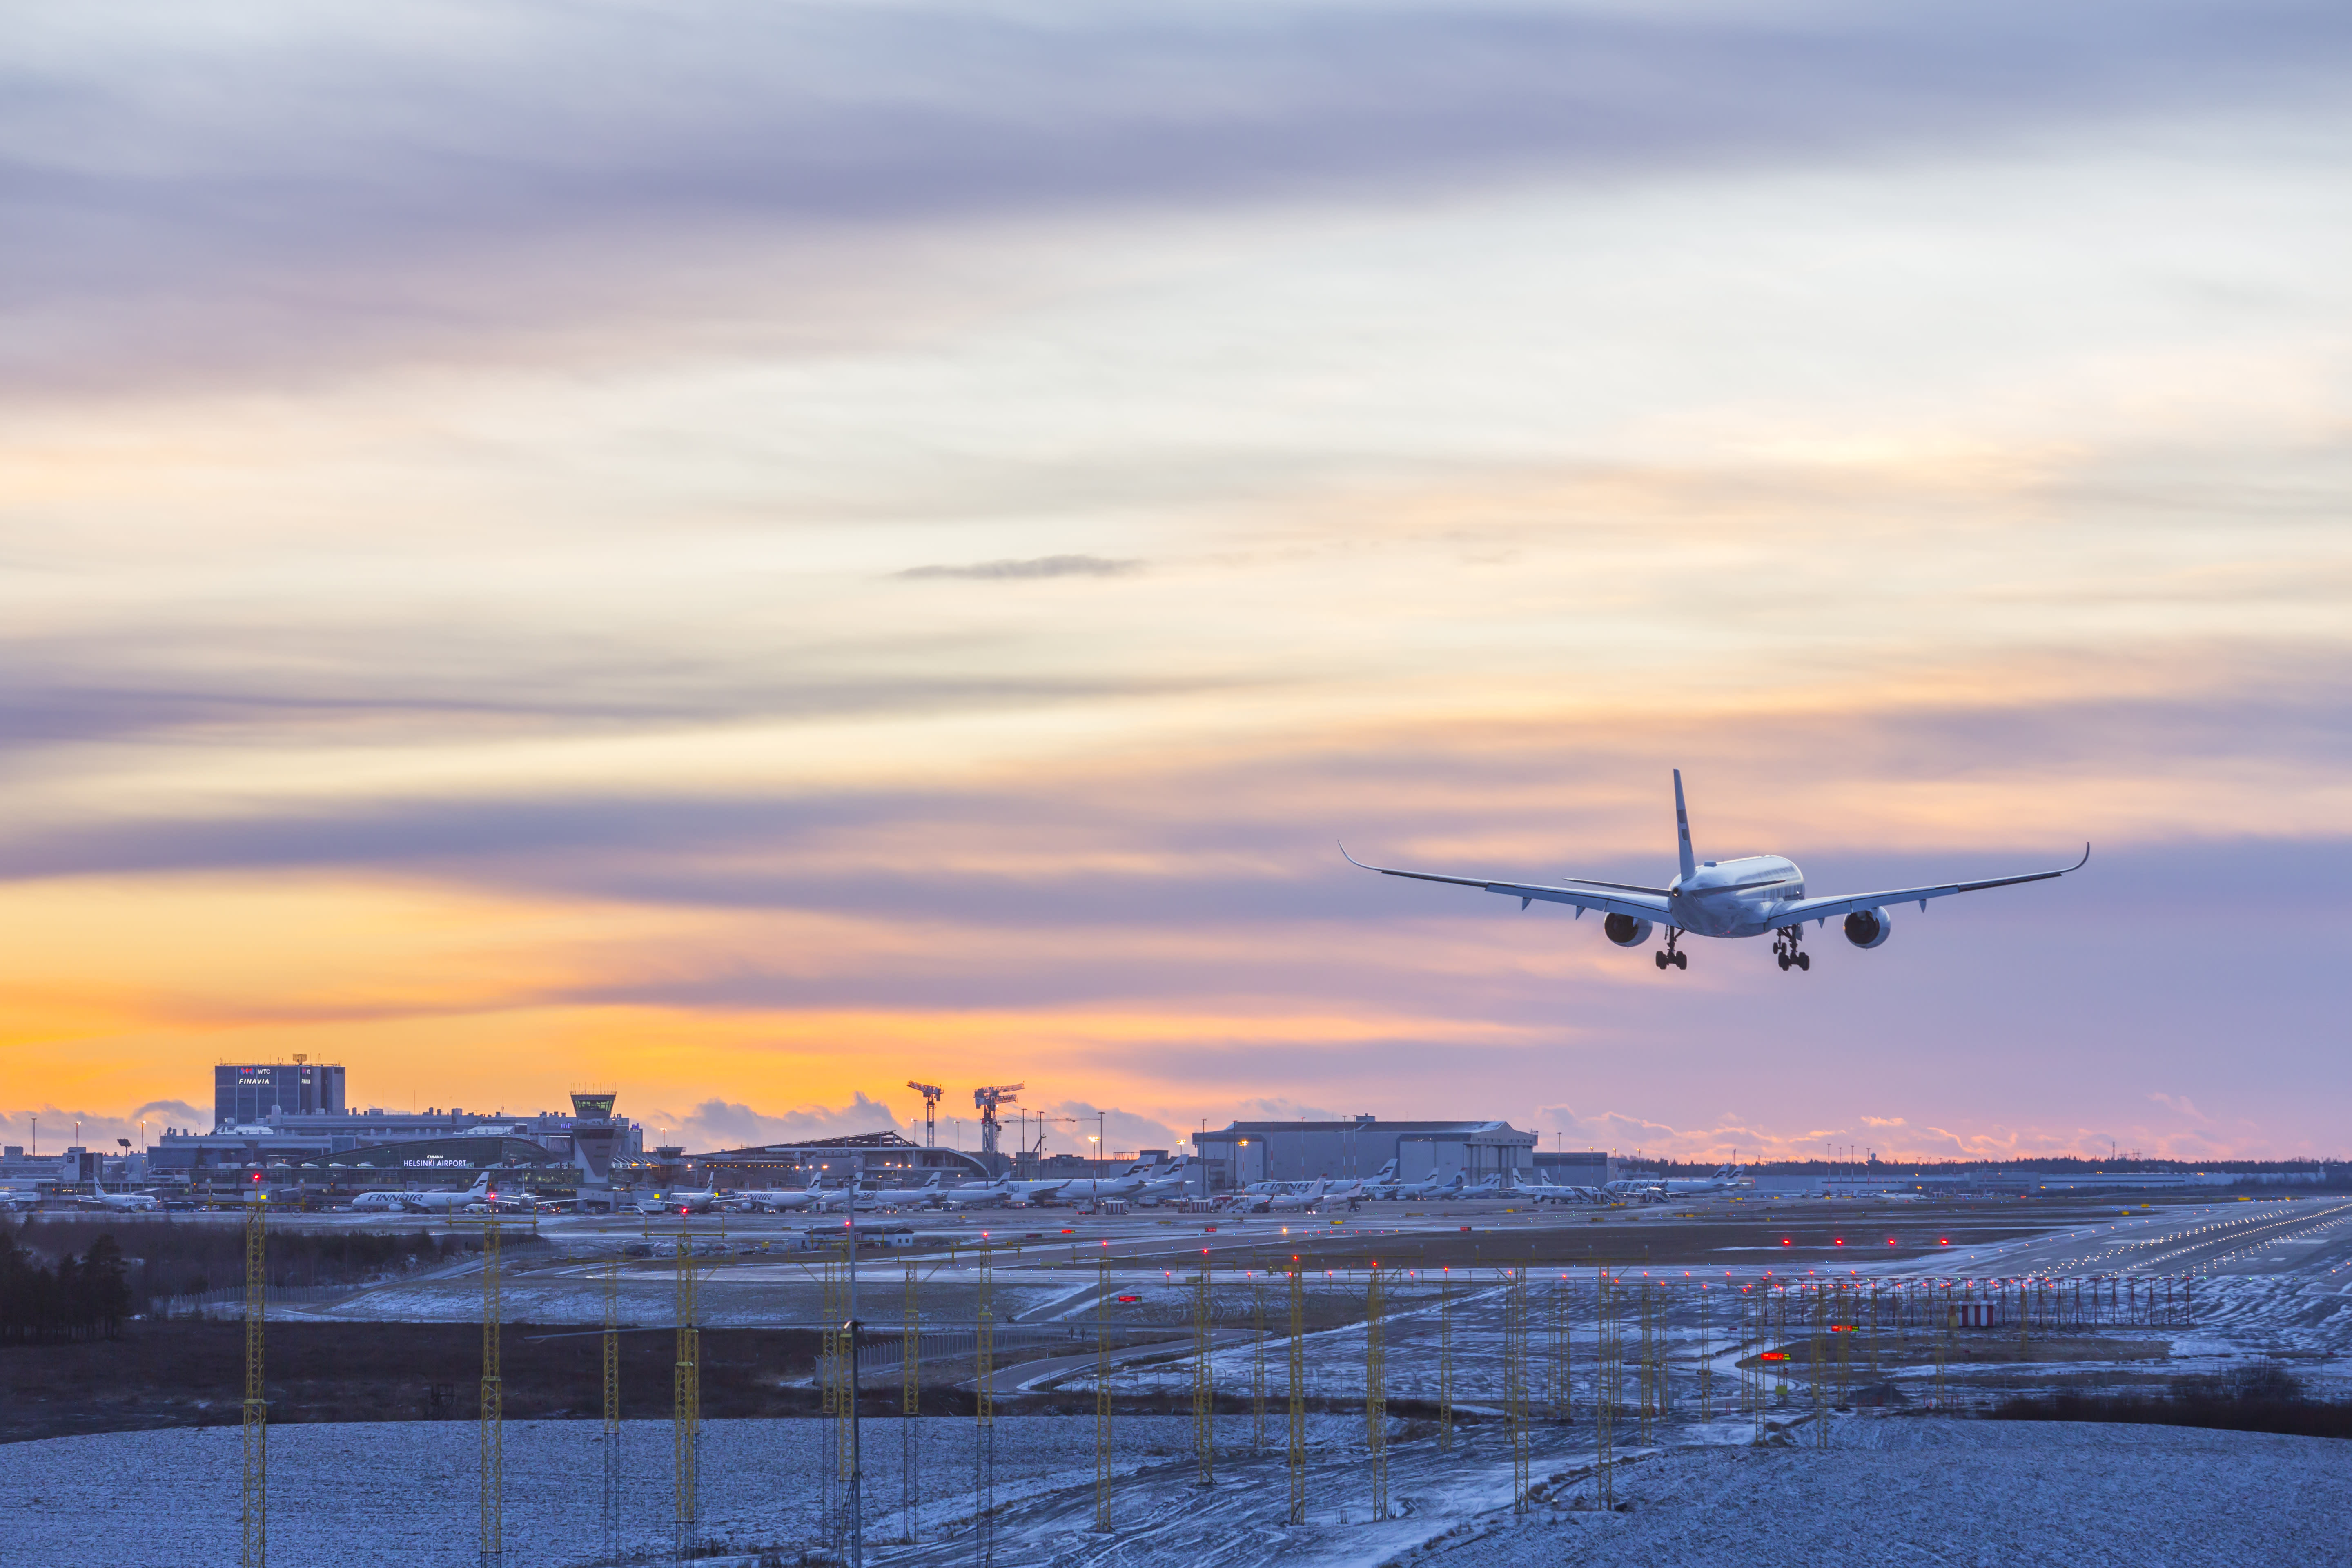 Finland’s air travel industry is recovering, but far from the pre-Covid level